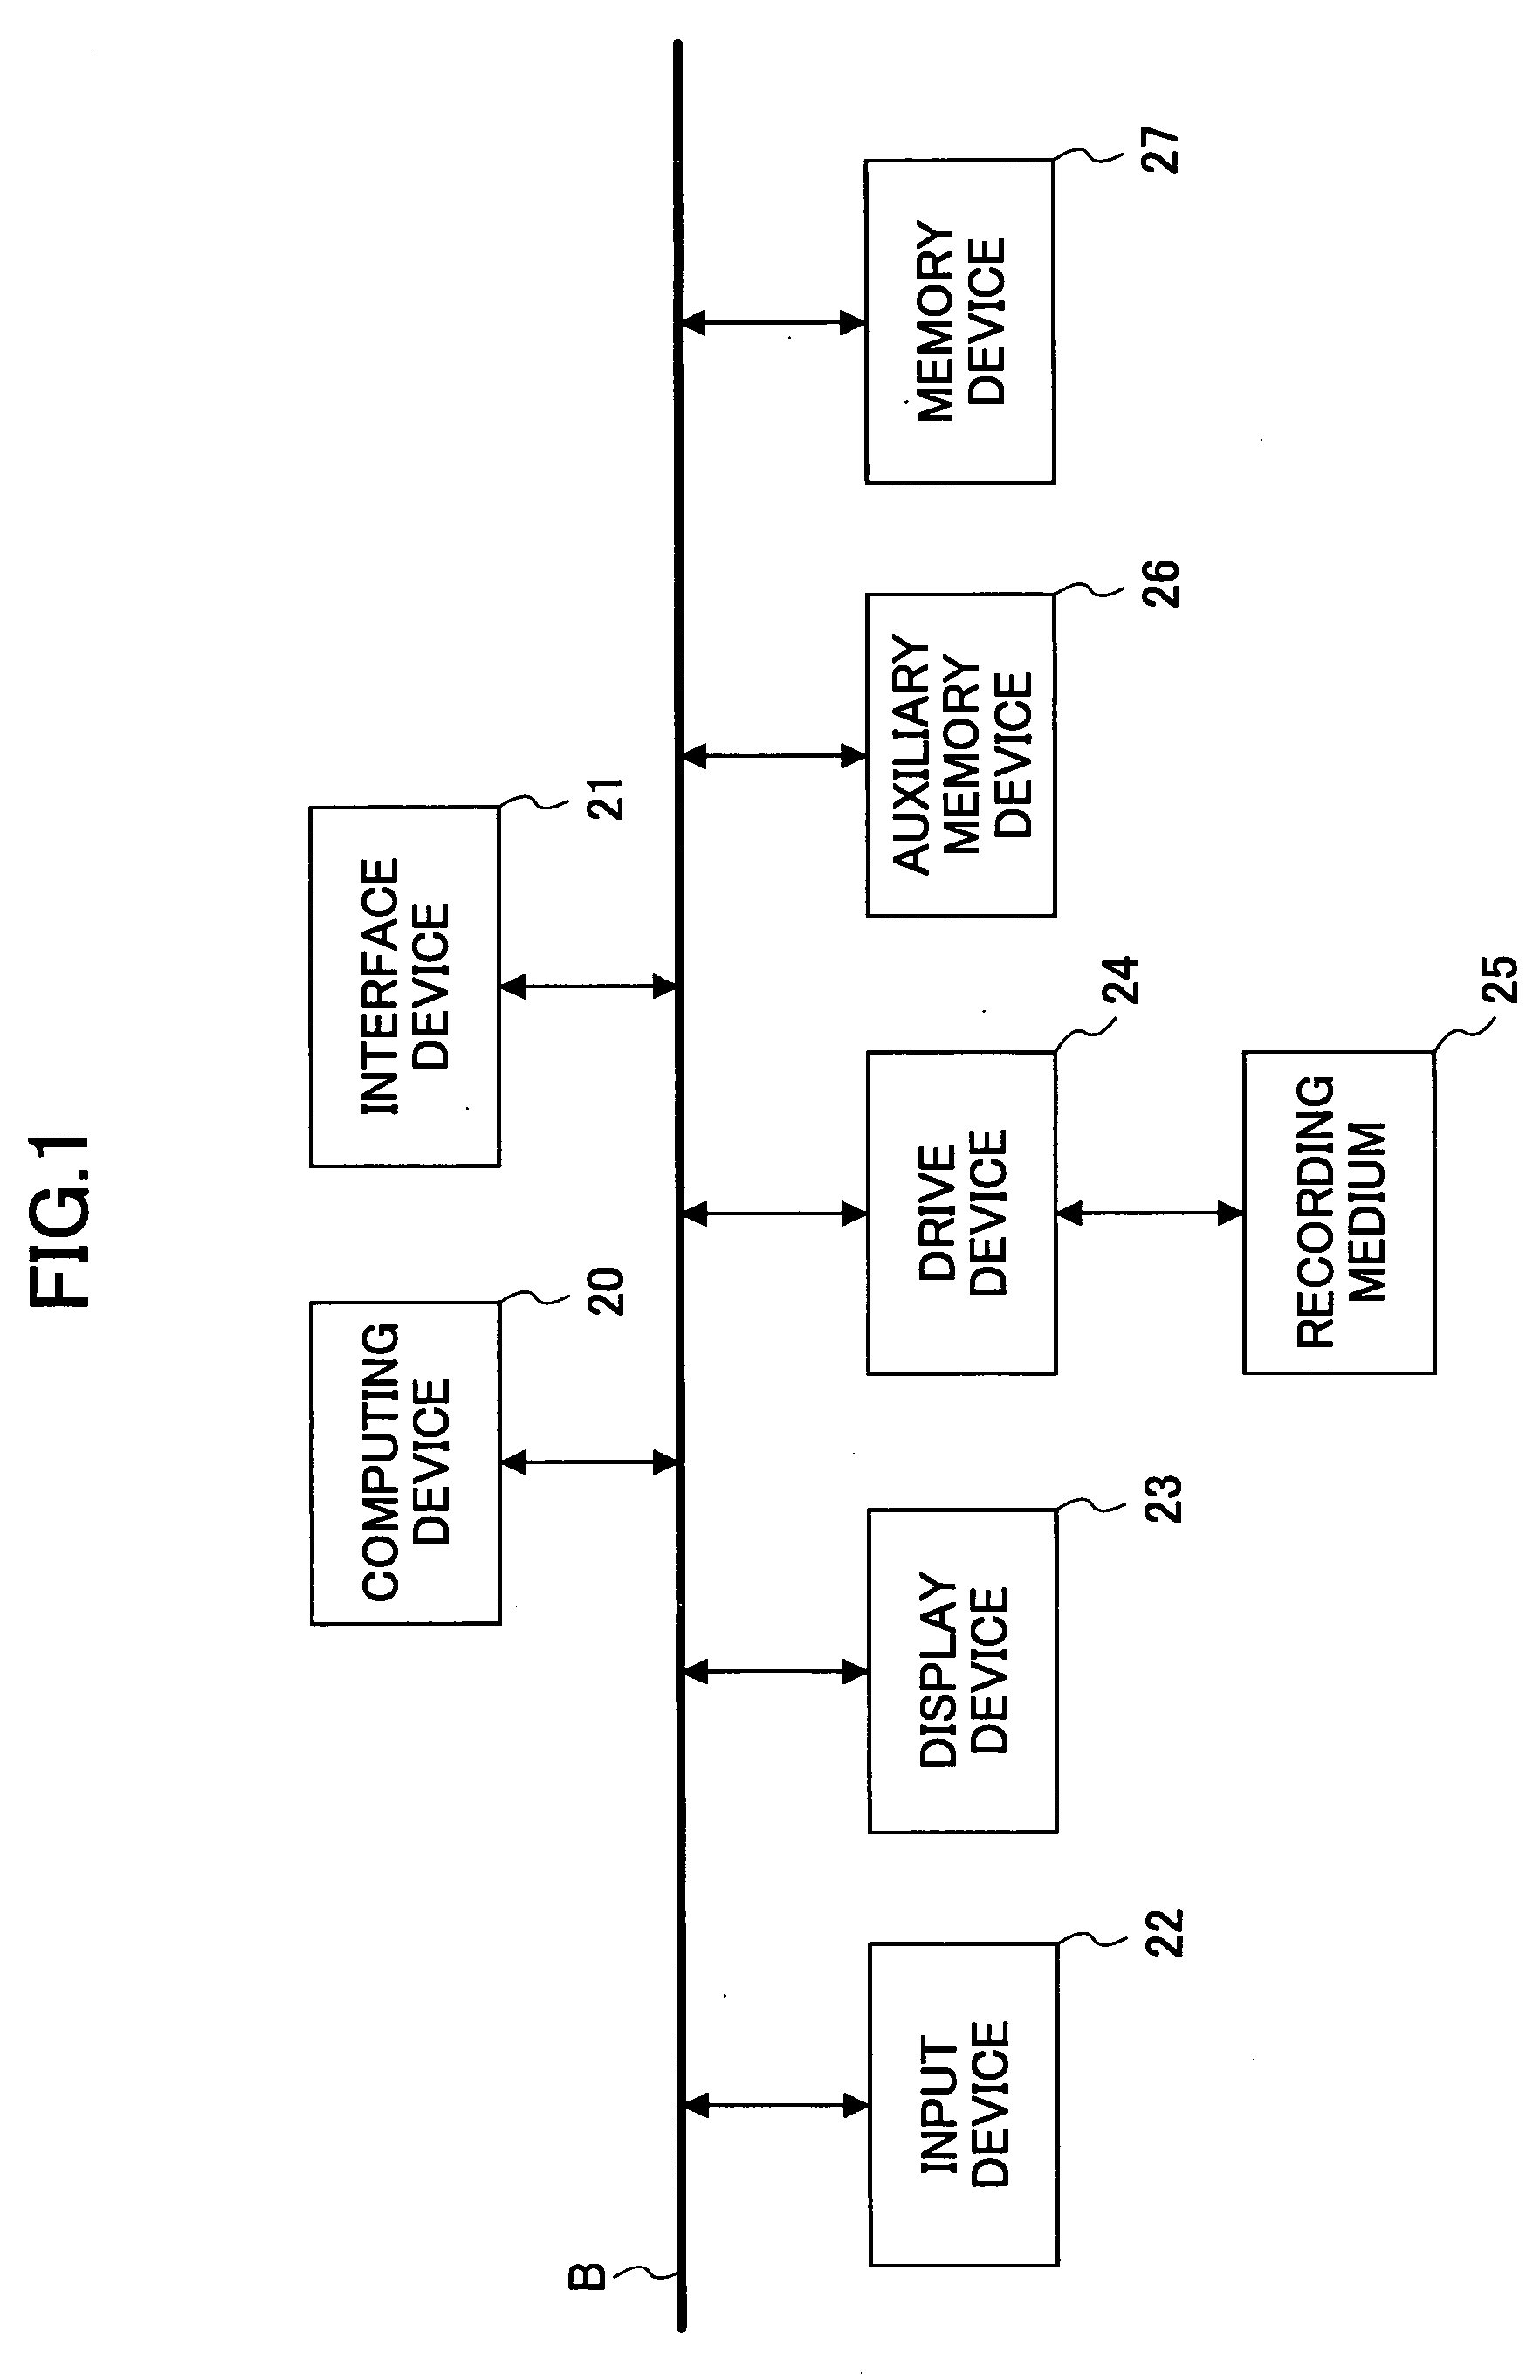 System and method for sharing display screen between information processing apparatuses